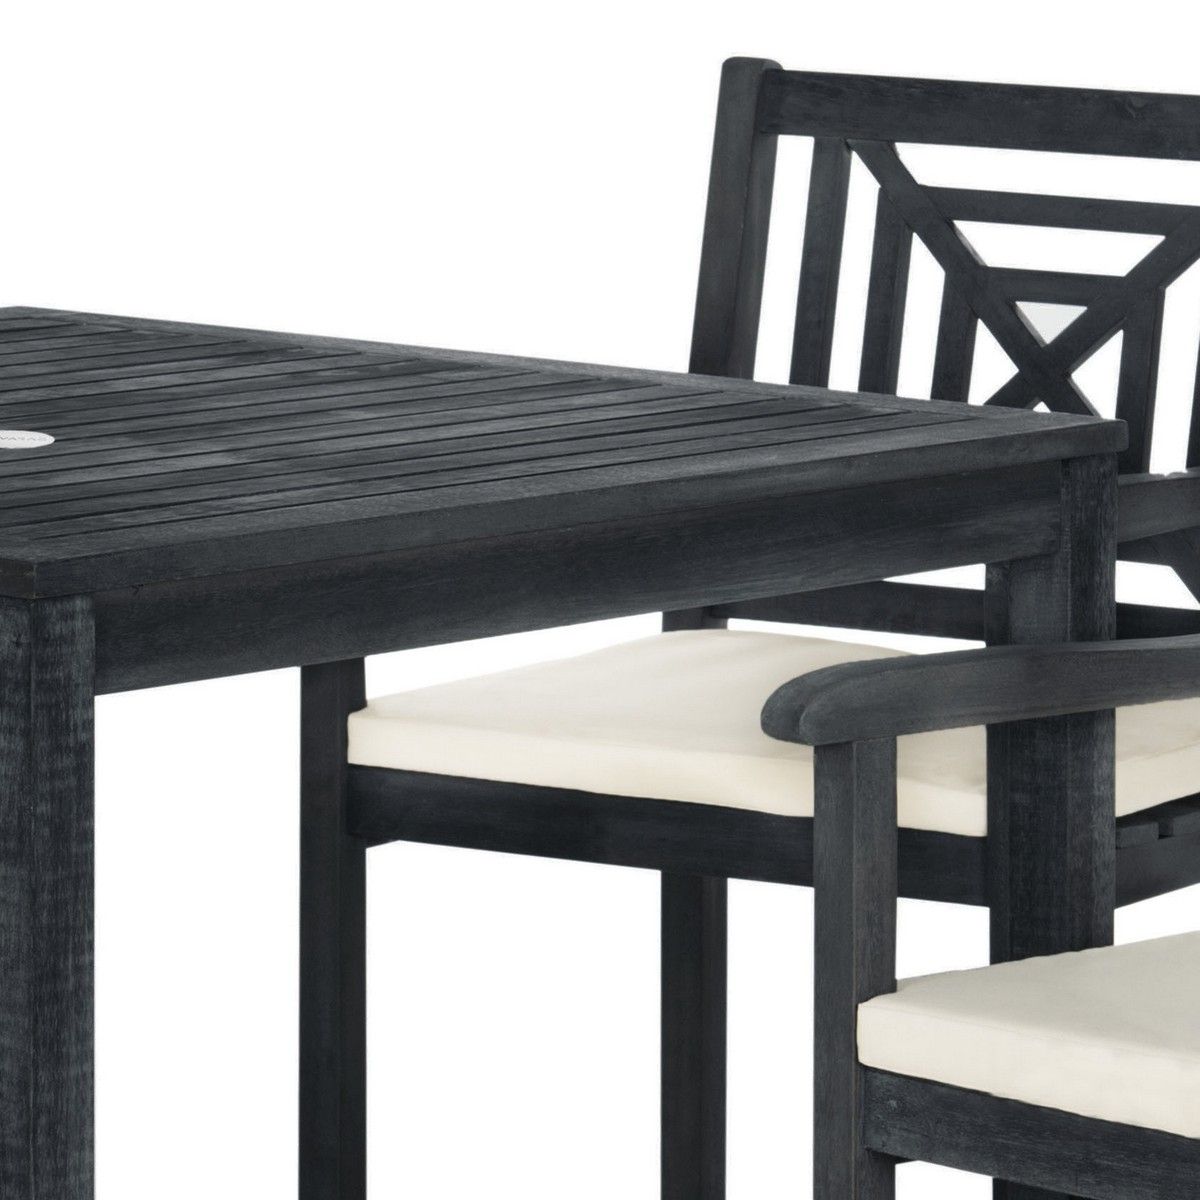 Delmar 5 Piece Dining Sets Pertaining To Popular Pat6722k Patio Sets – 5 Piece Outdoor Dining Sets – Furniture (View 20 of 20)